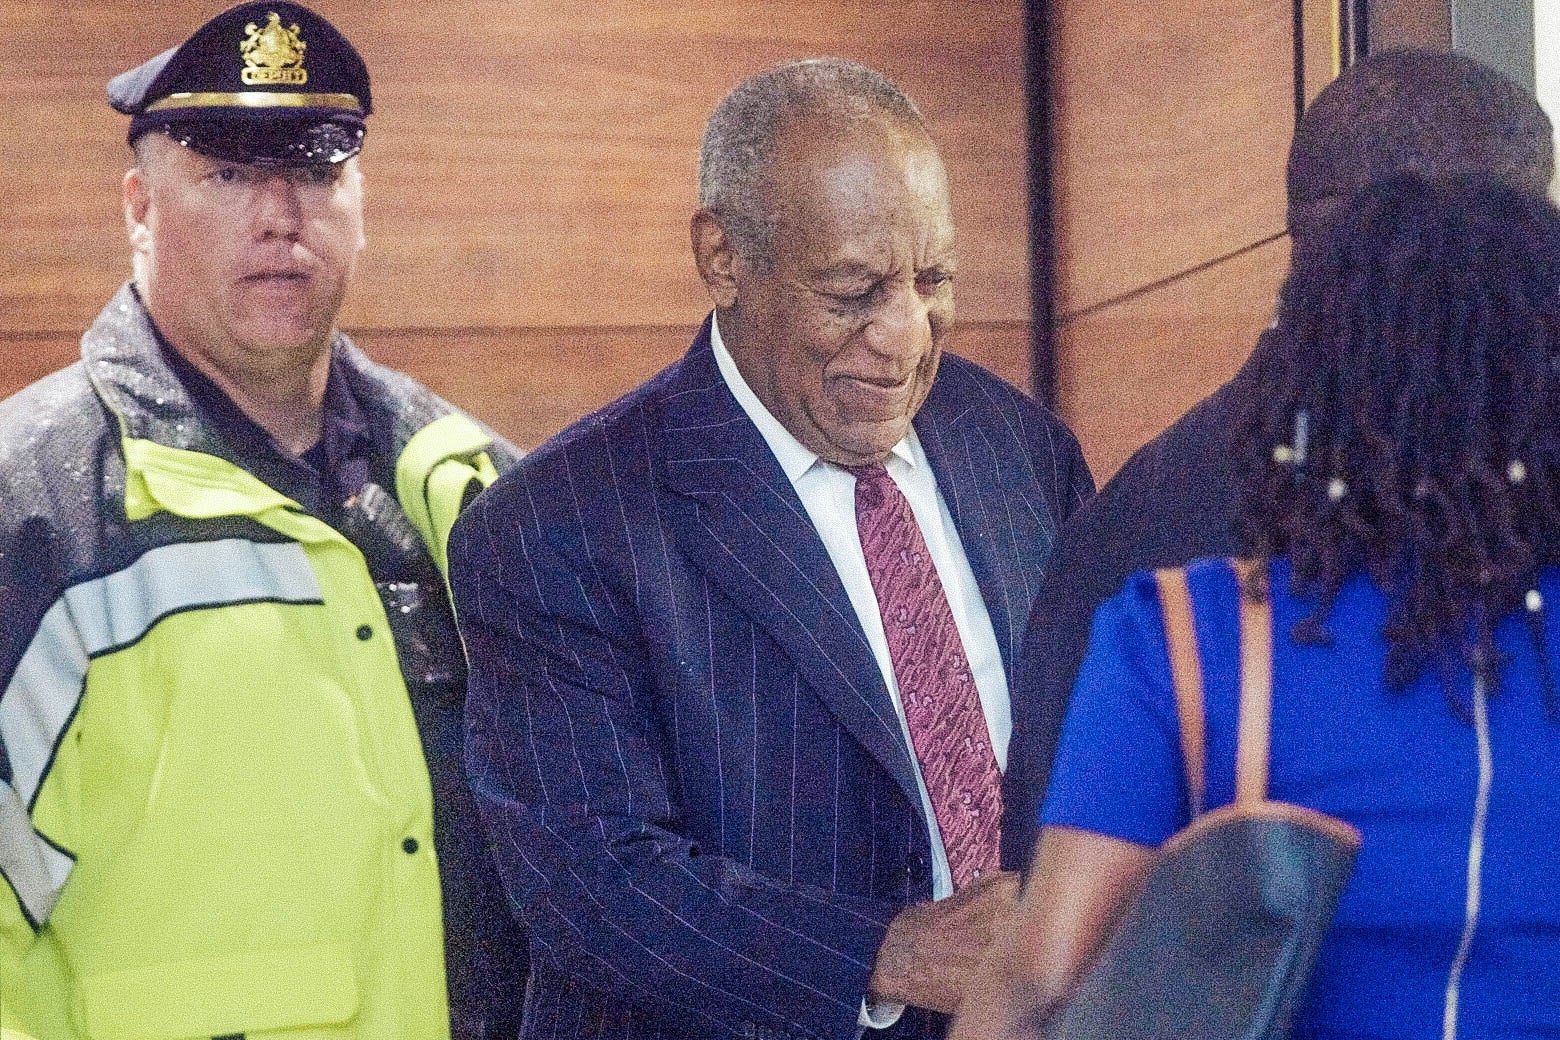 Bill Cosby smiles as he steps out of an elevator at the courthouse wearing a suit.